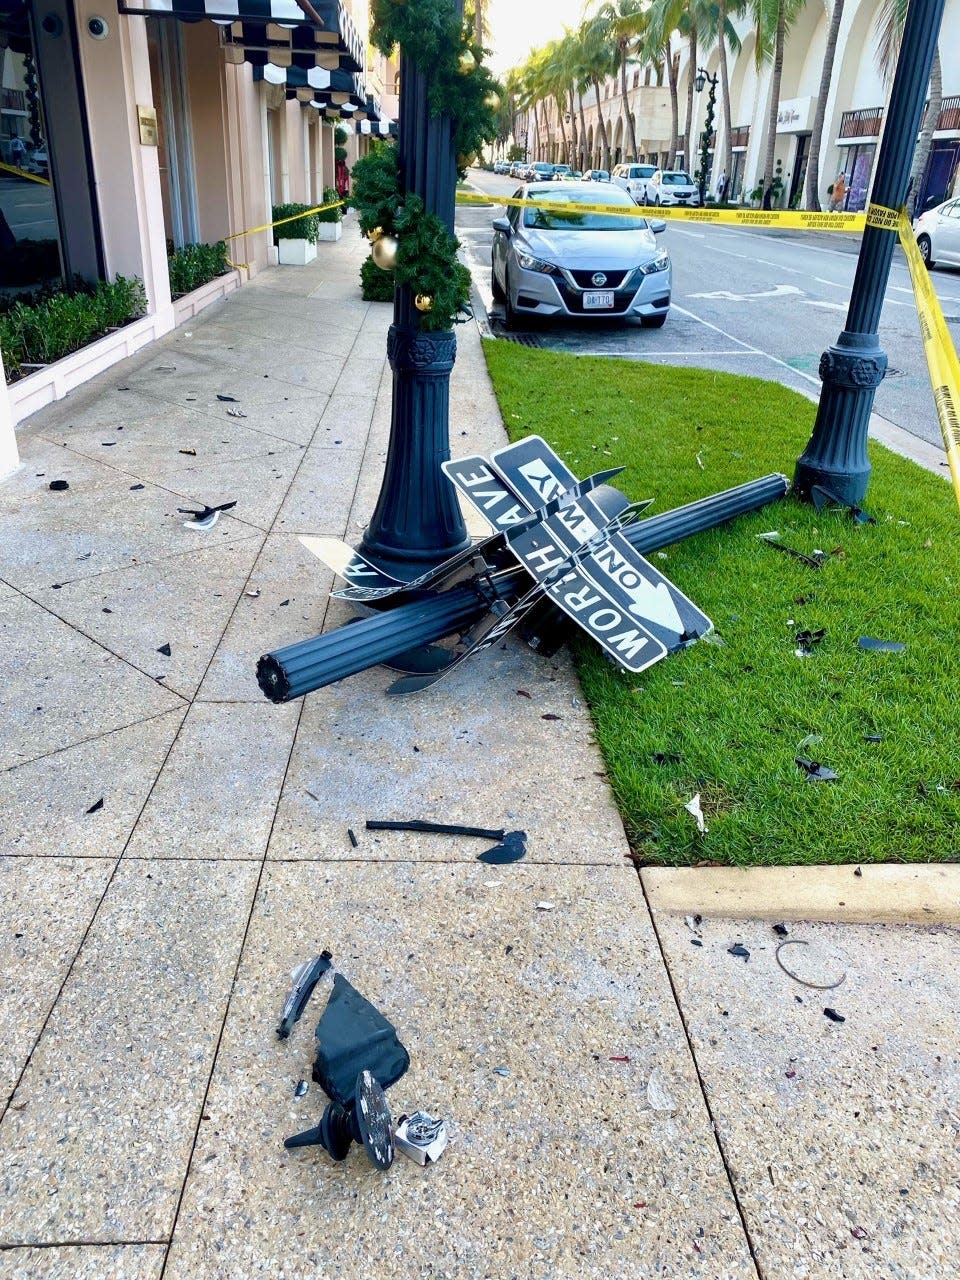 Resident John David Corey took this picture of a damaged sign at Saturday's crash scene while out for his morning run at about 7:45 a.m., he said.